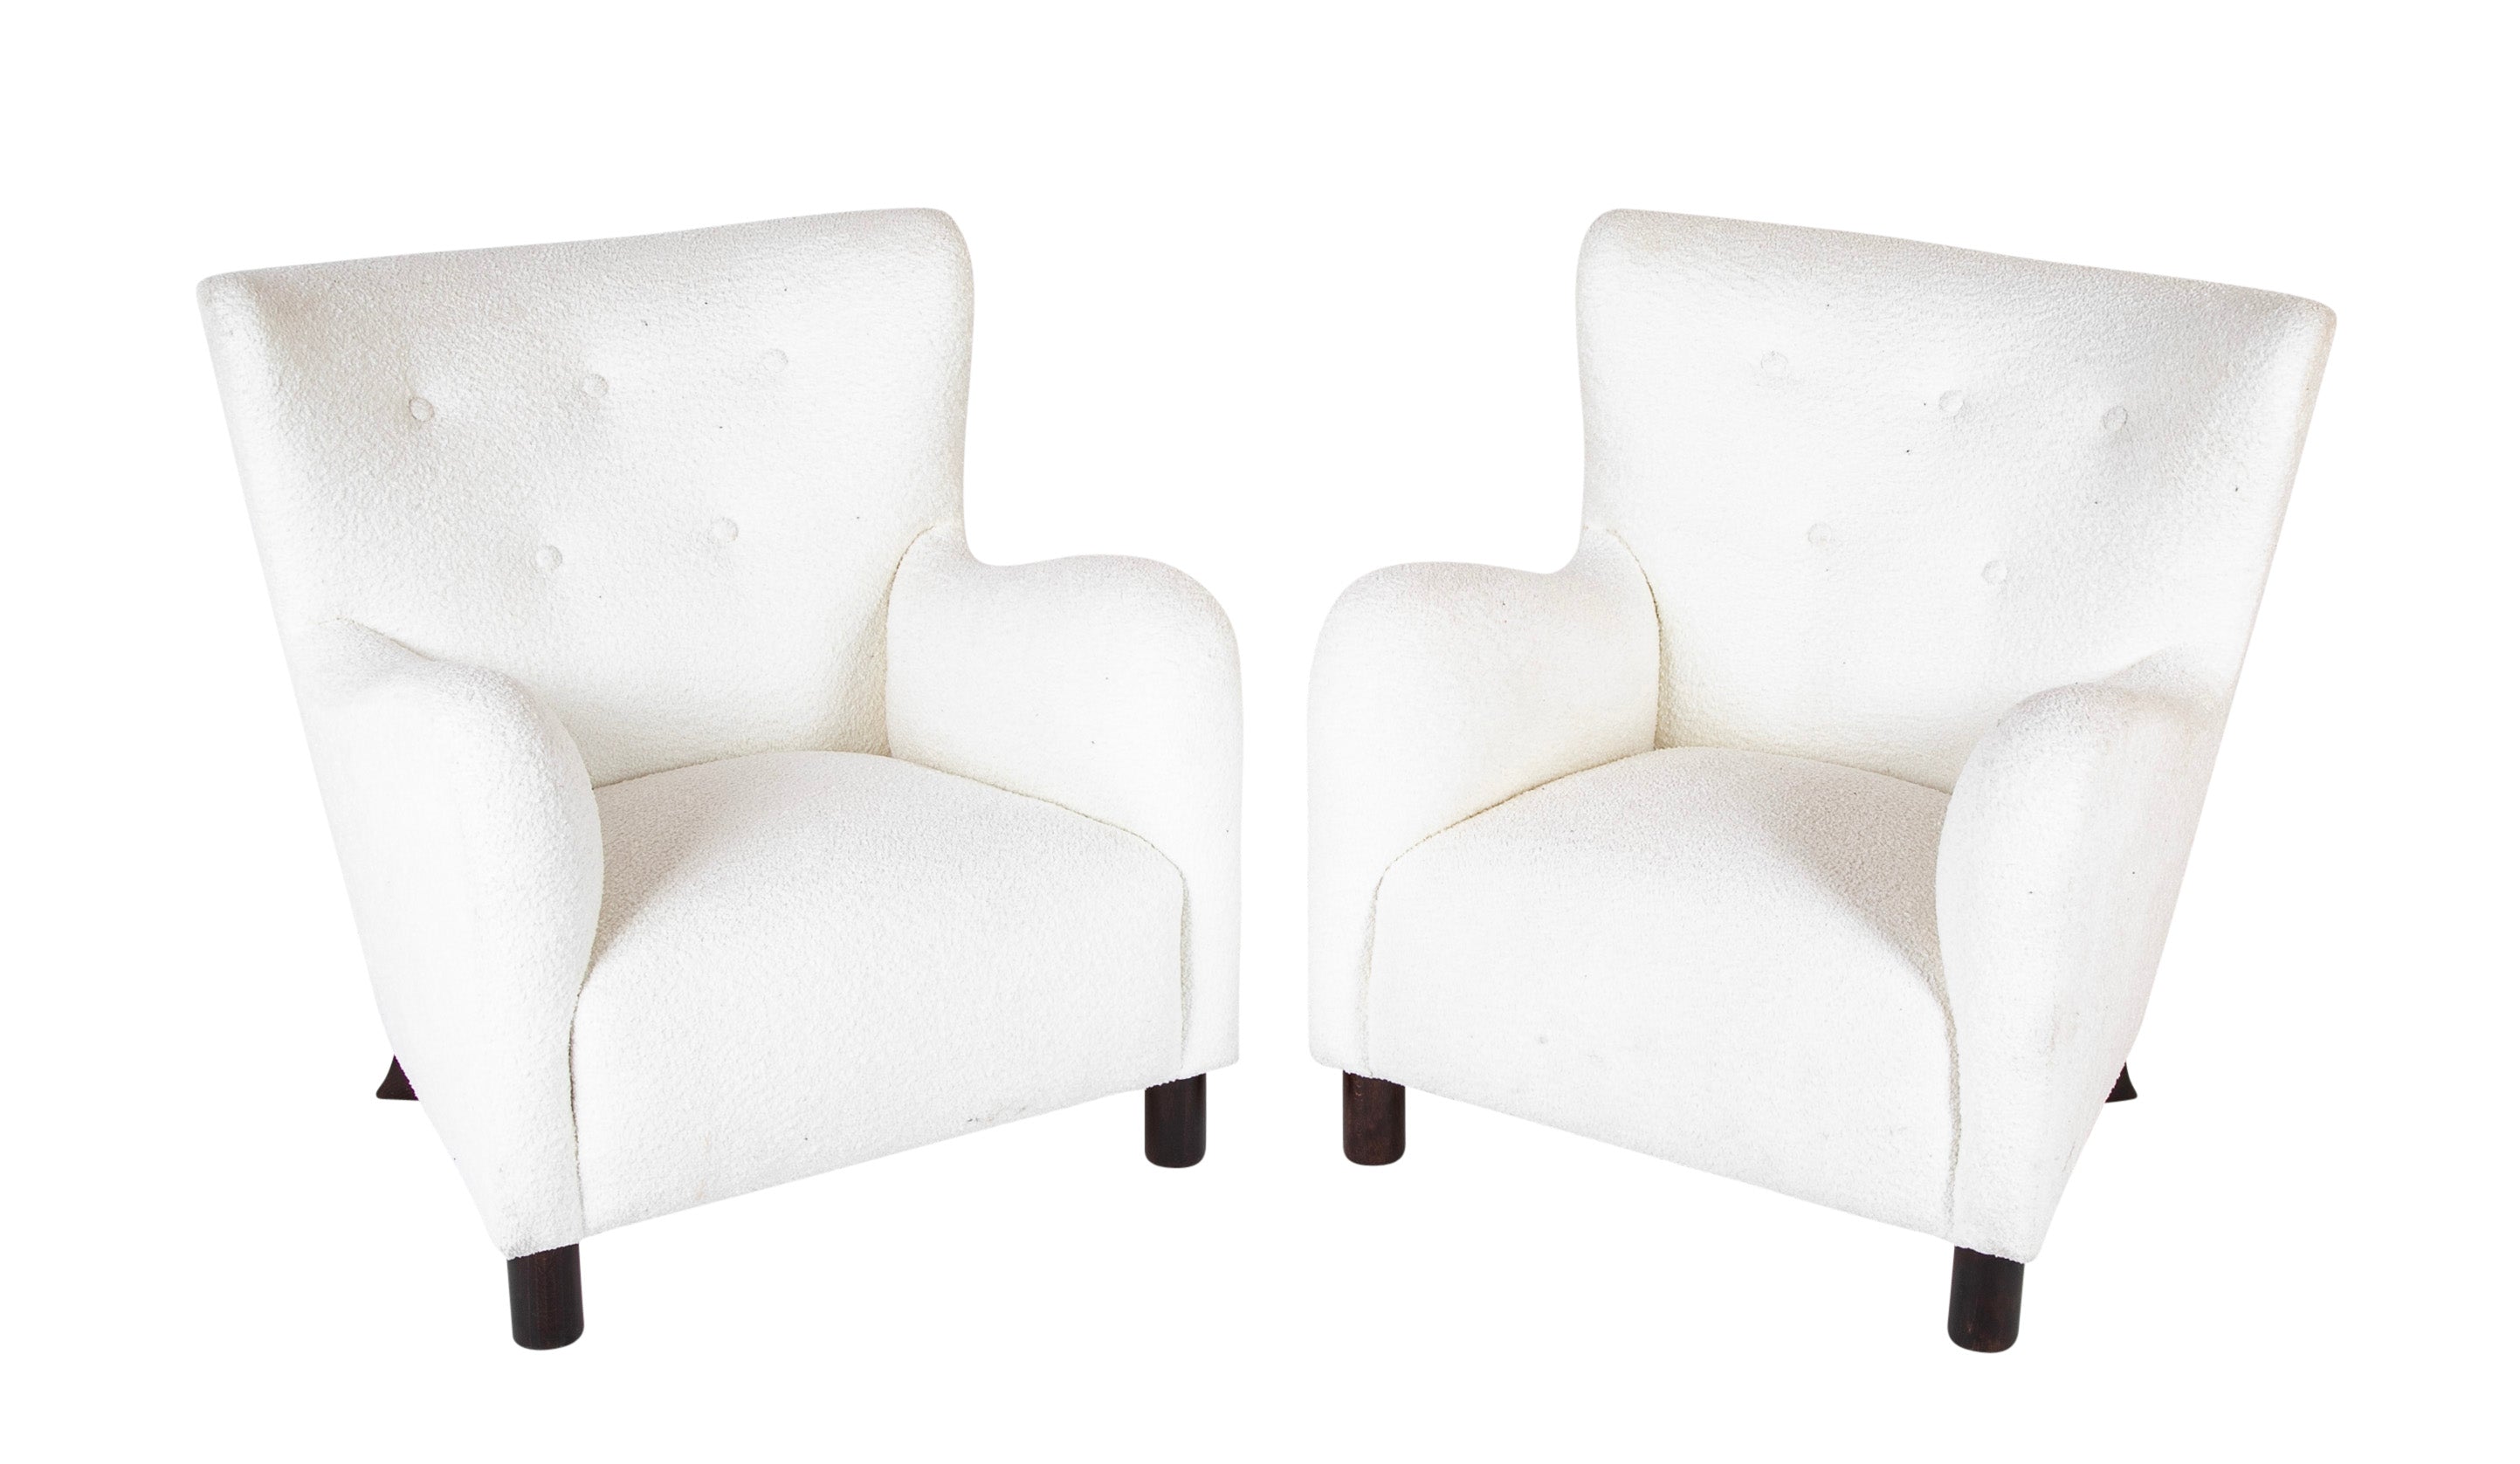 A Pair of Danish Mid-Century Upholstered Easy Chairs with Stained Beech Legs